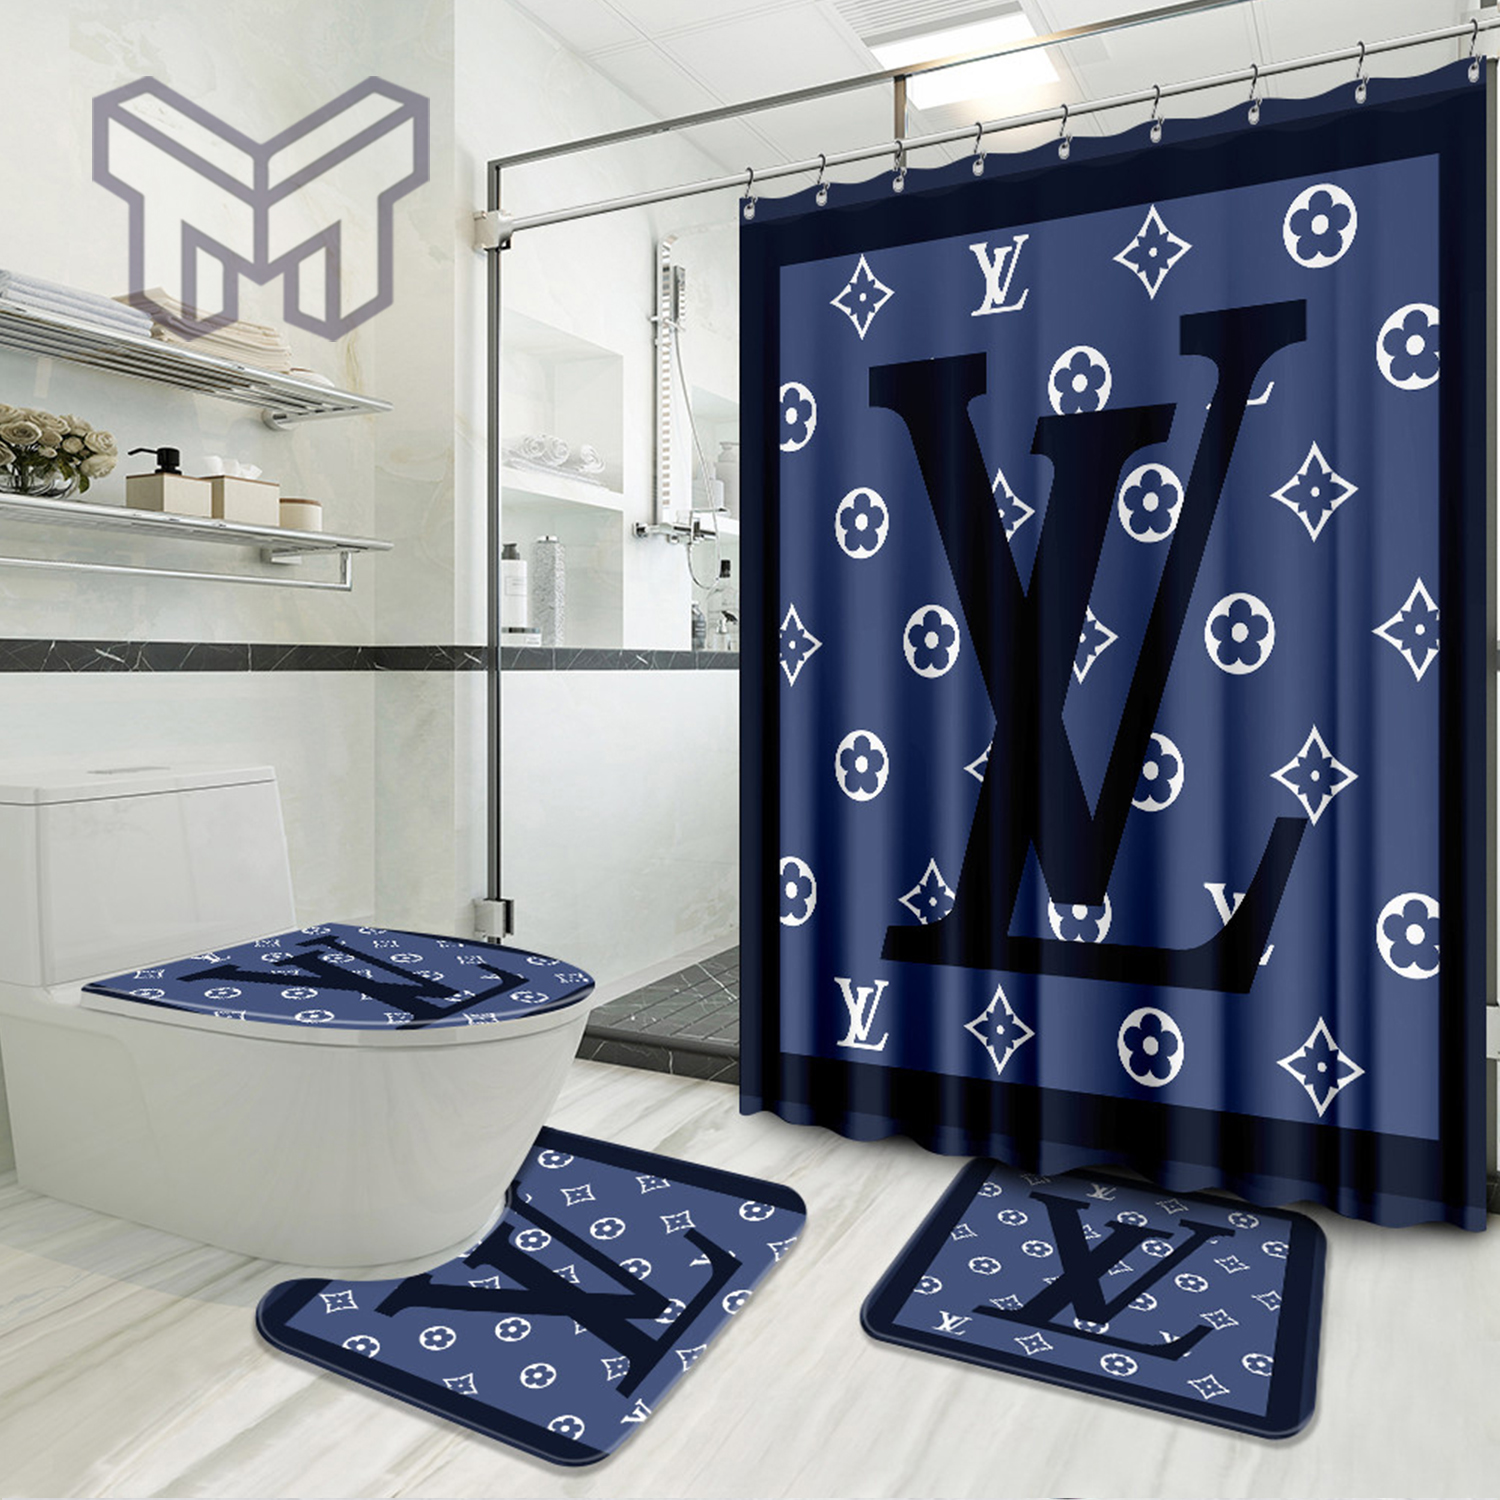 Louis Vuitton Fashion Logo Limited Luxury Brand Bathroom Set Home Decor 58  Shower Curtain And Rug Toilet Seat Lid Covers Bathroom Set - Muranotex Store